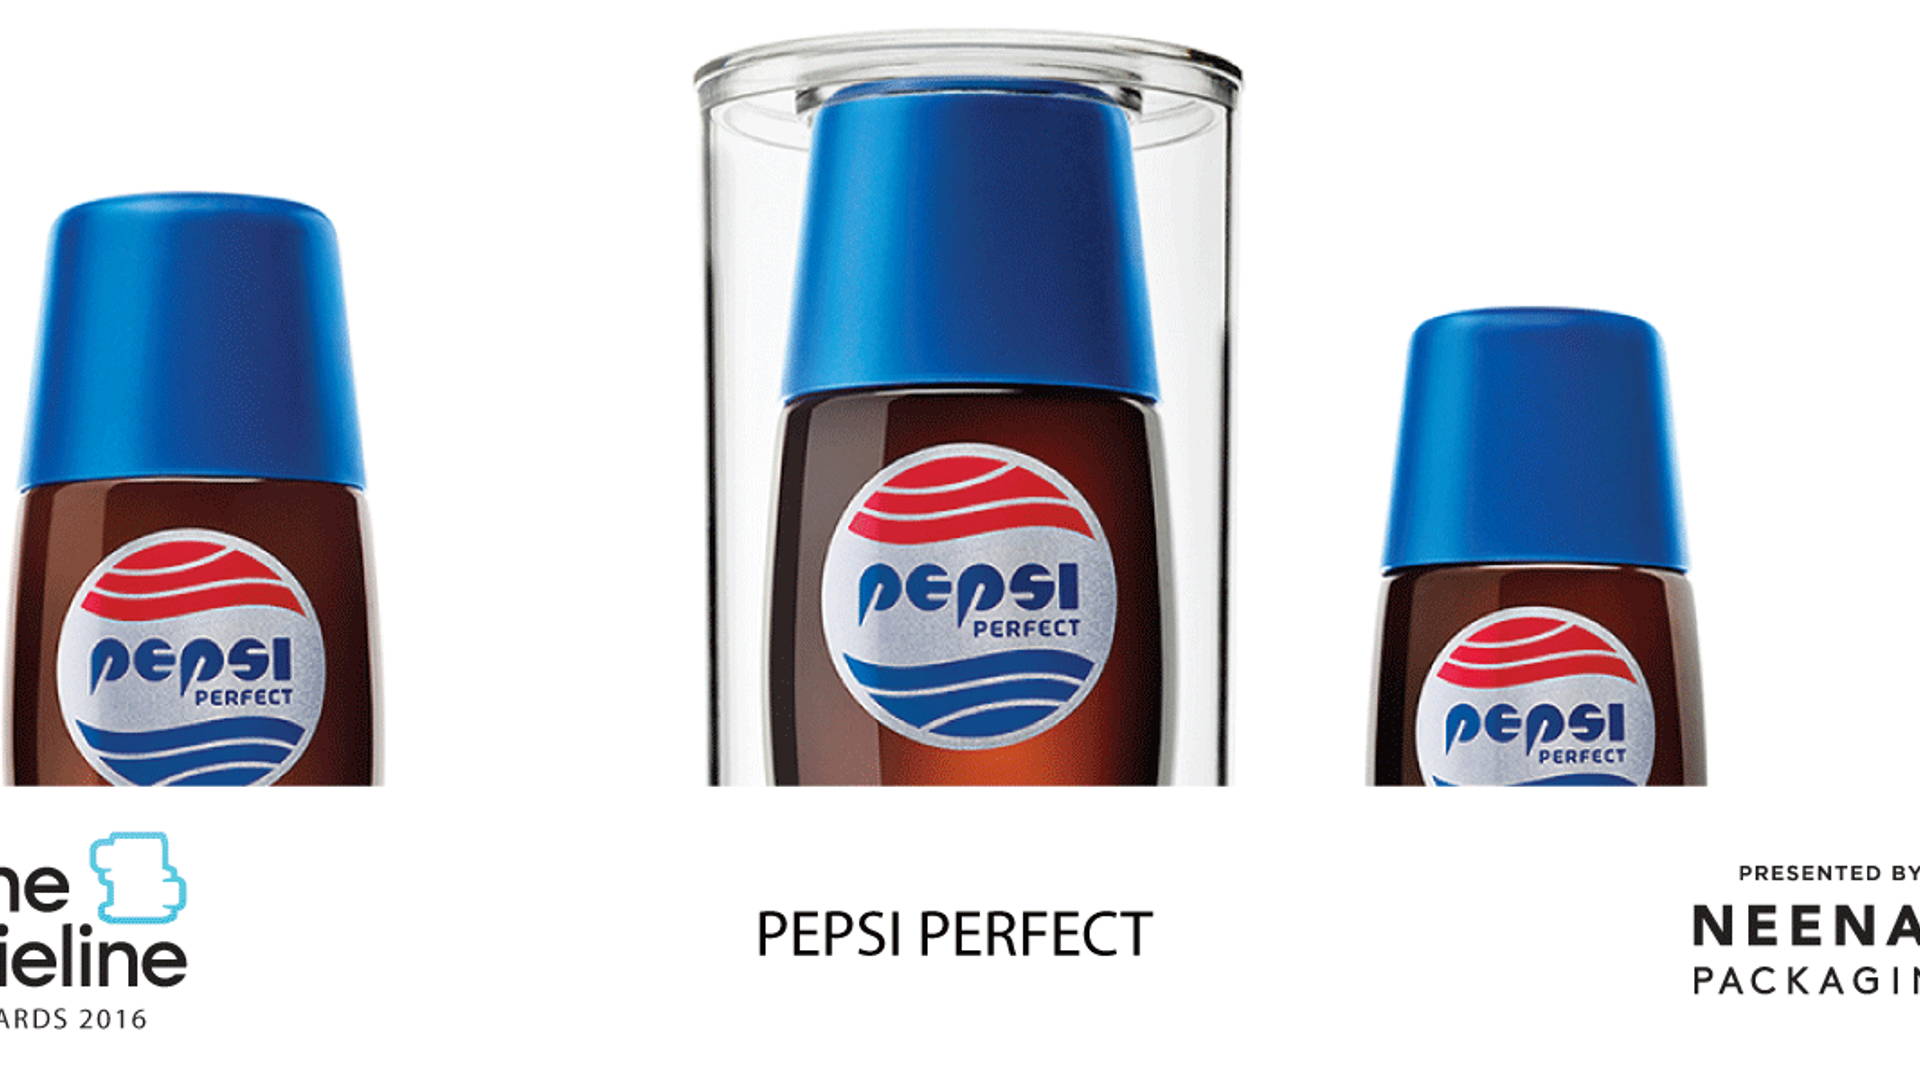 Featured image for The Dieline Awards 2016 Outstanding Achievements: Pepsi Perfect